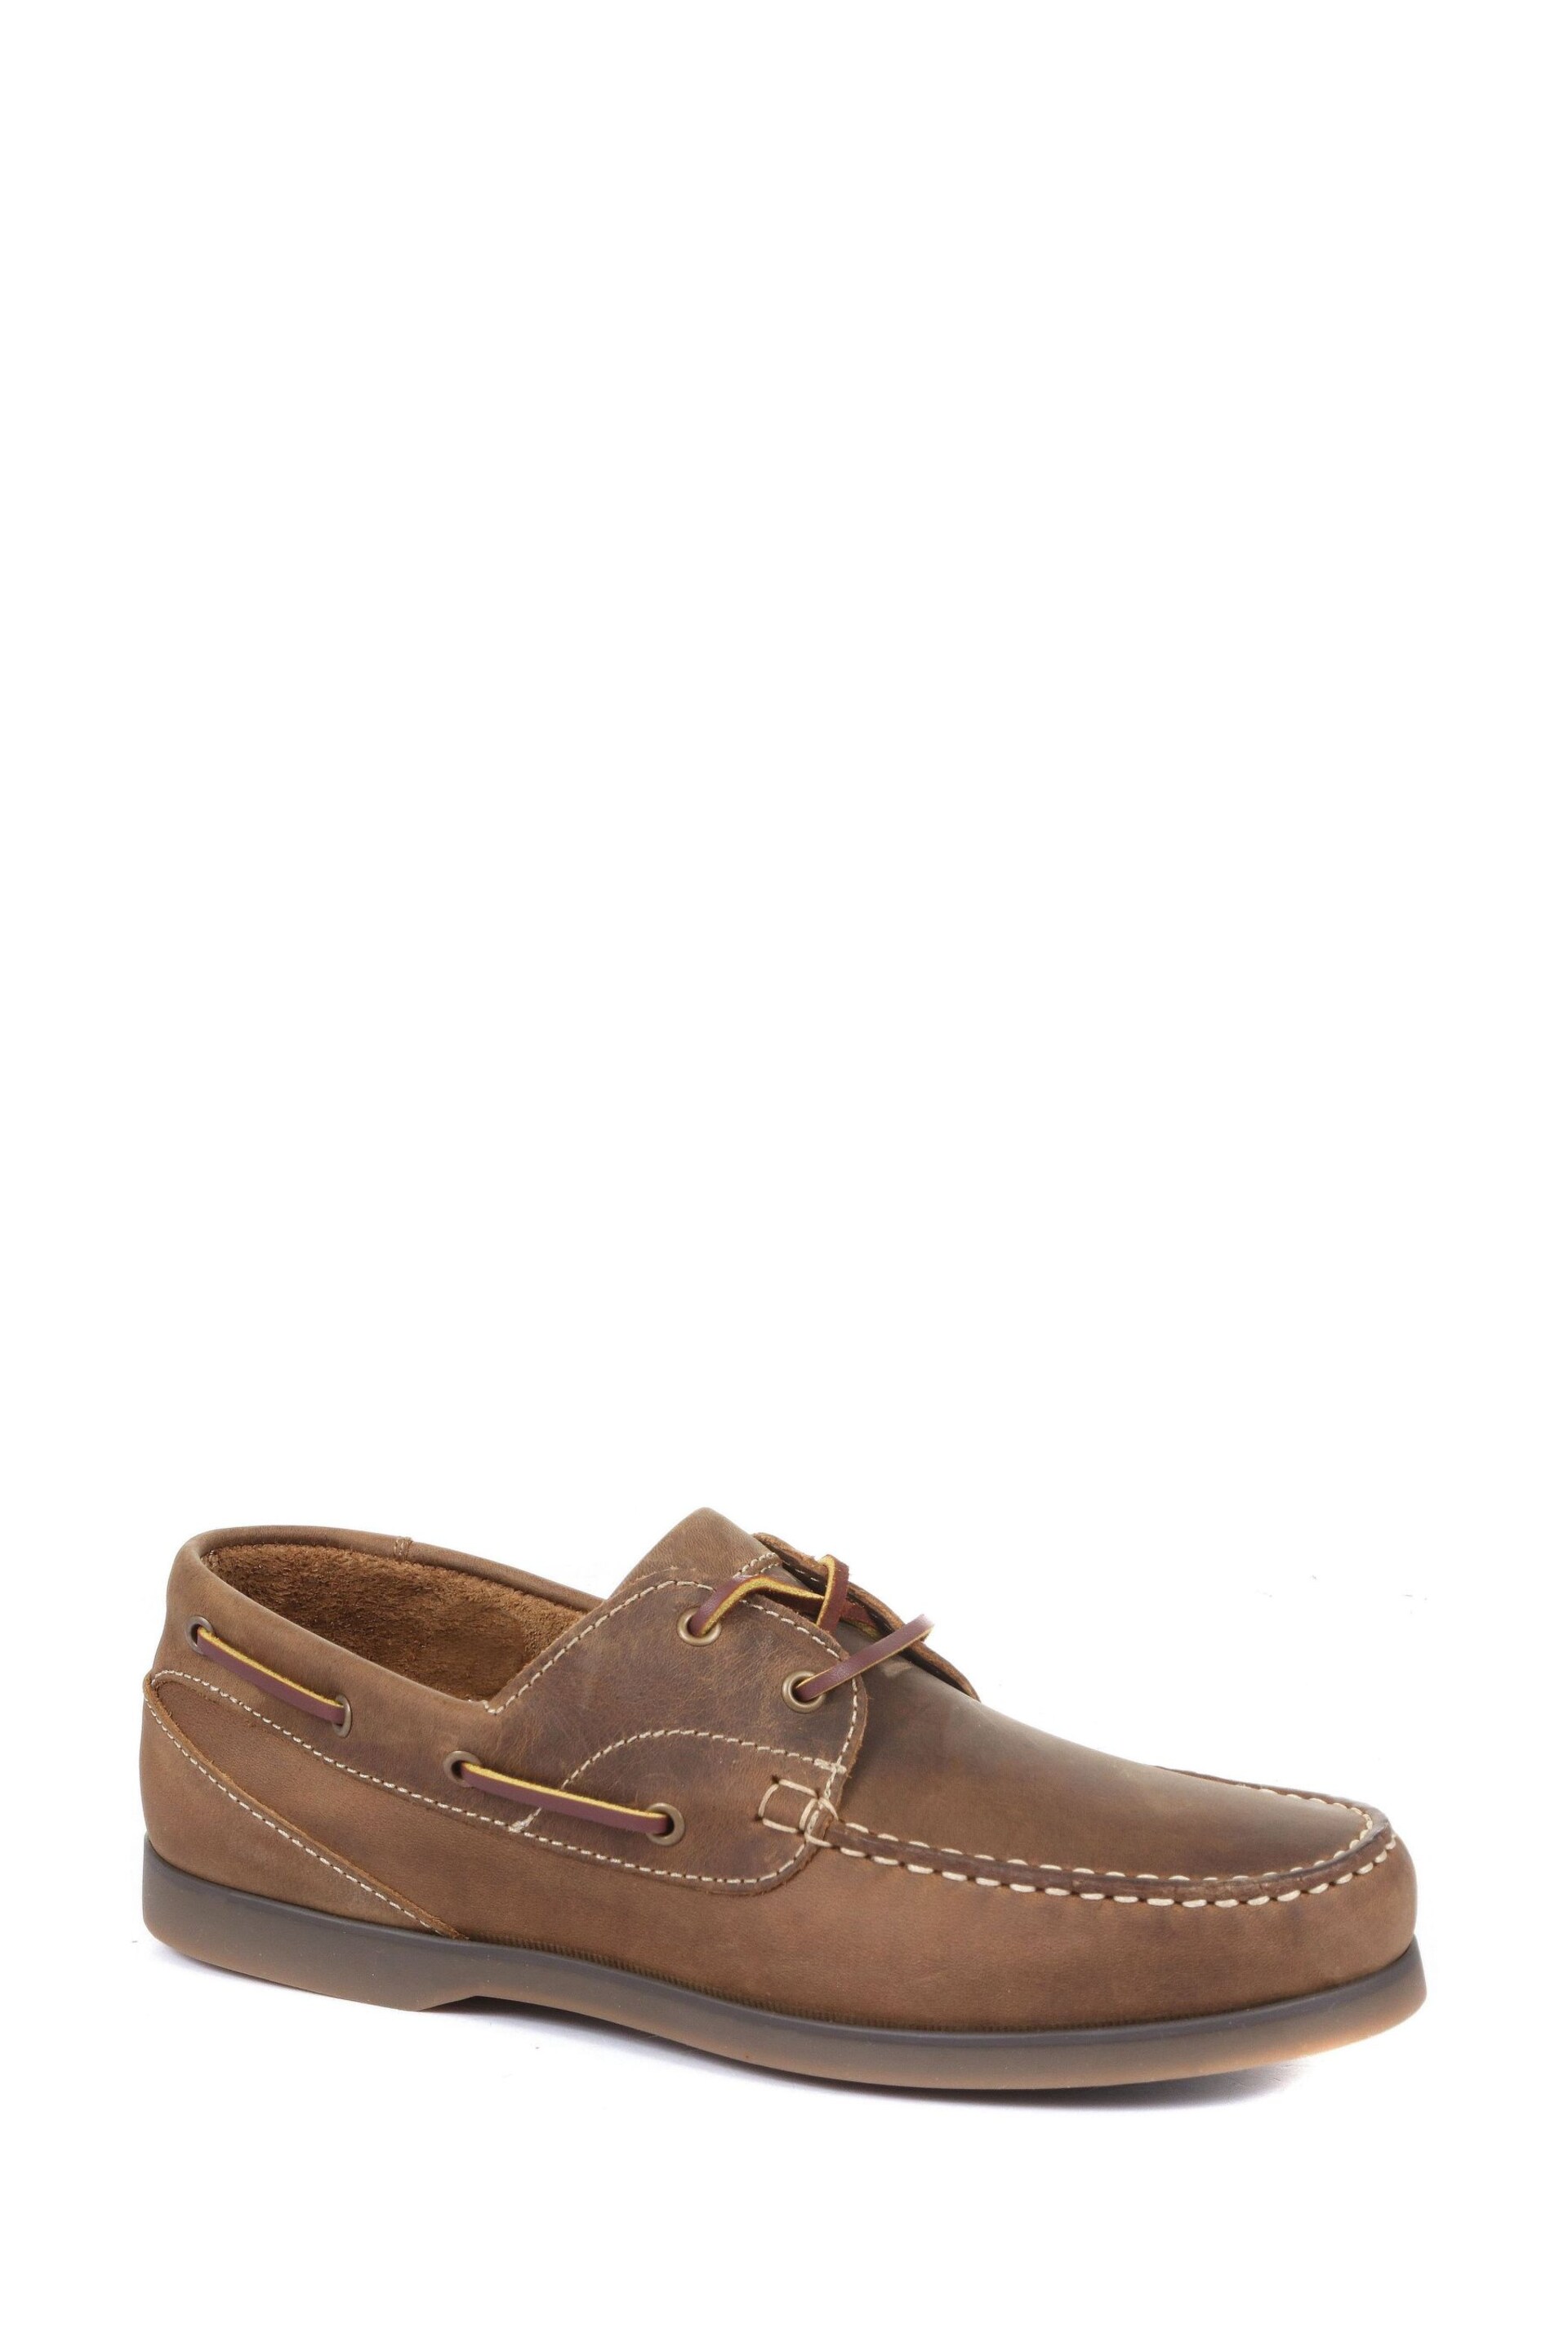 Jones Bootmaker Parsons Leather Boat Brown Shoes - Image 2 of 5